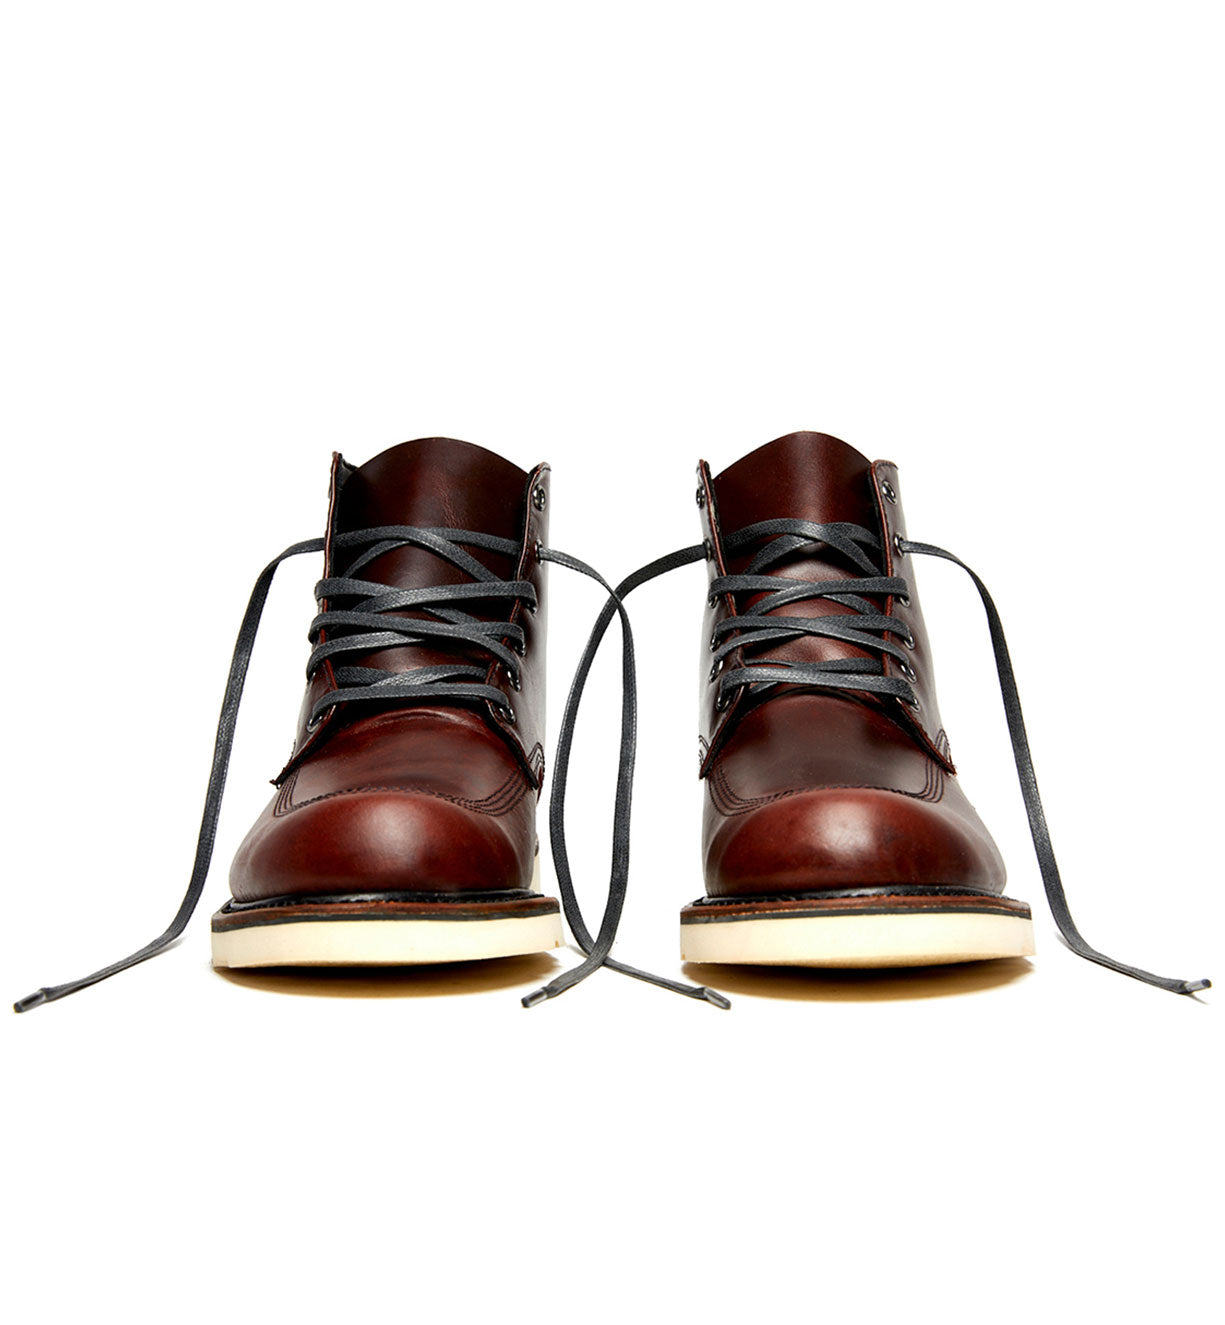 A pair of Broken Homme Jaime Boots with laces, showcased on a white background.